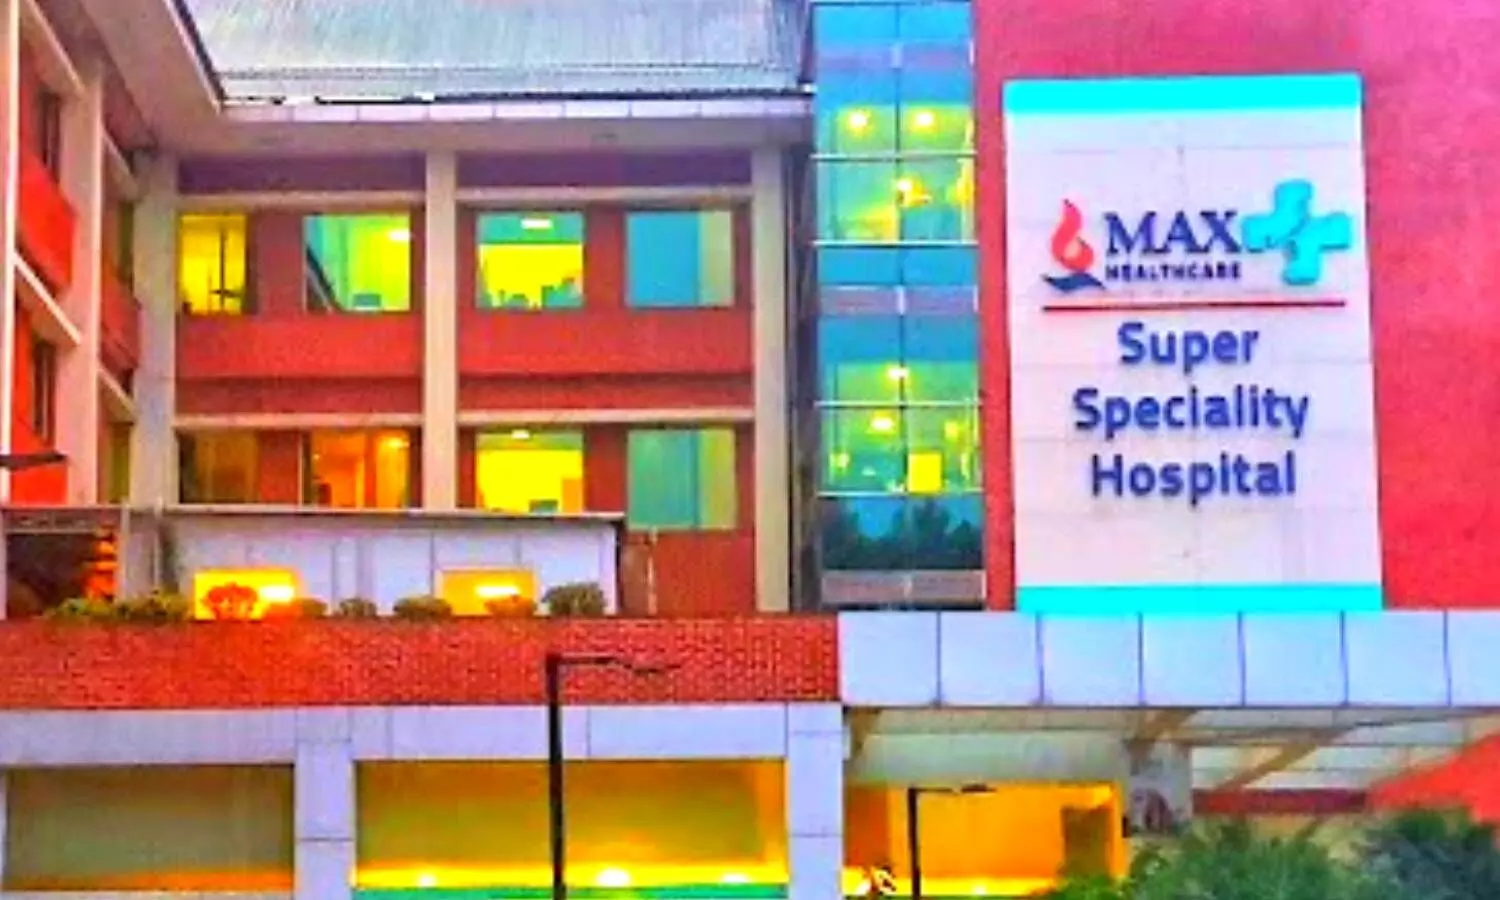 Max Healthcare expands Super Speciality Hospital in Mohali with investment of Rs 400 crore